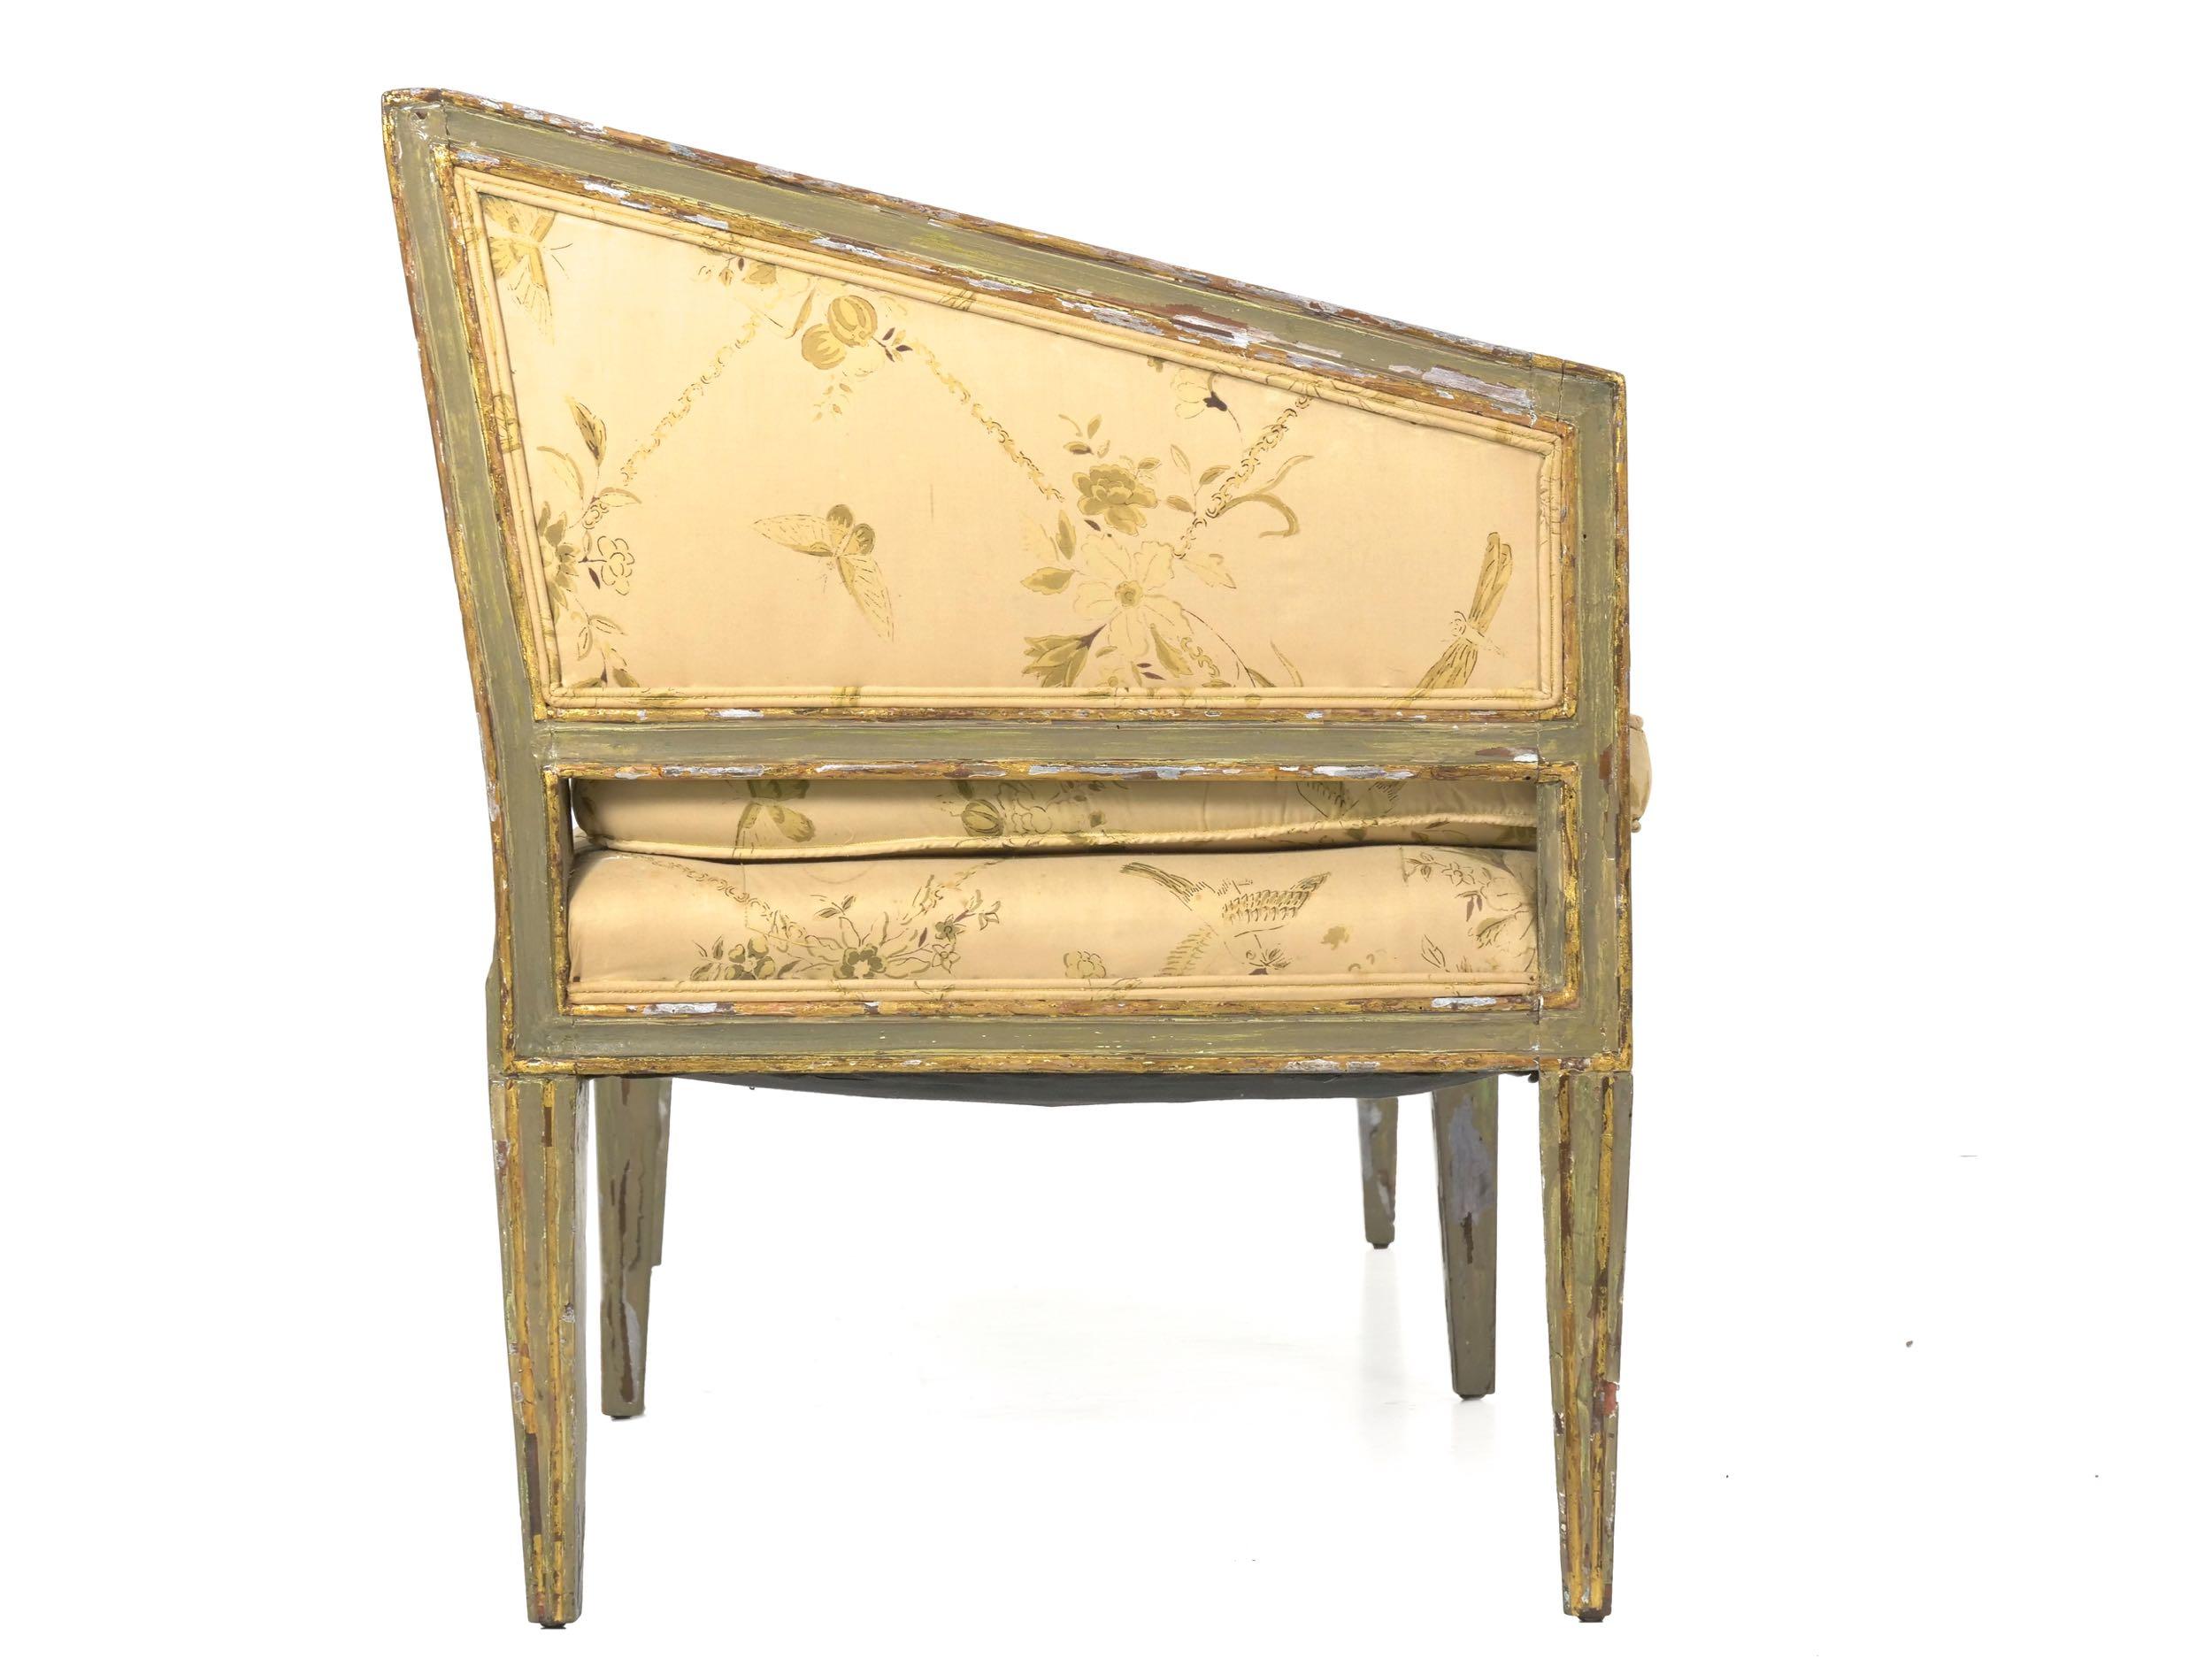 Polychromed Neoclassical Gray Polychrome Painted Settee Sofa Canape, Early 19th Century